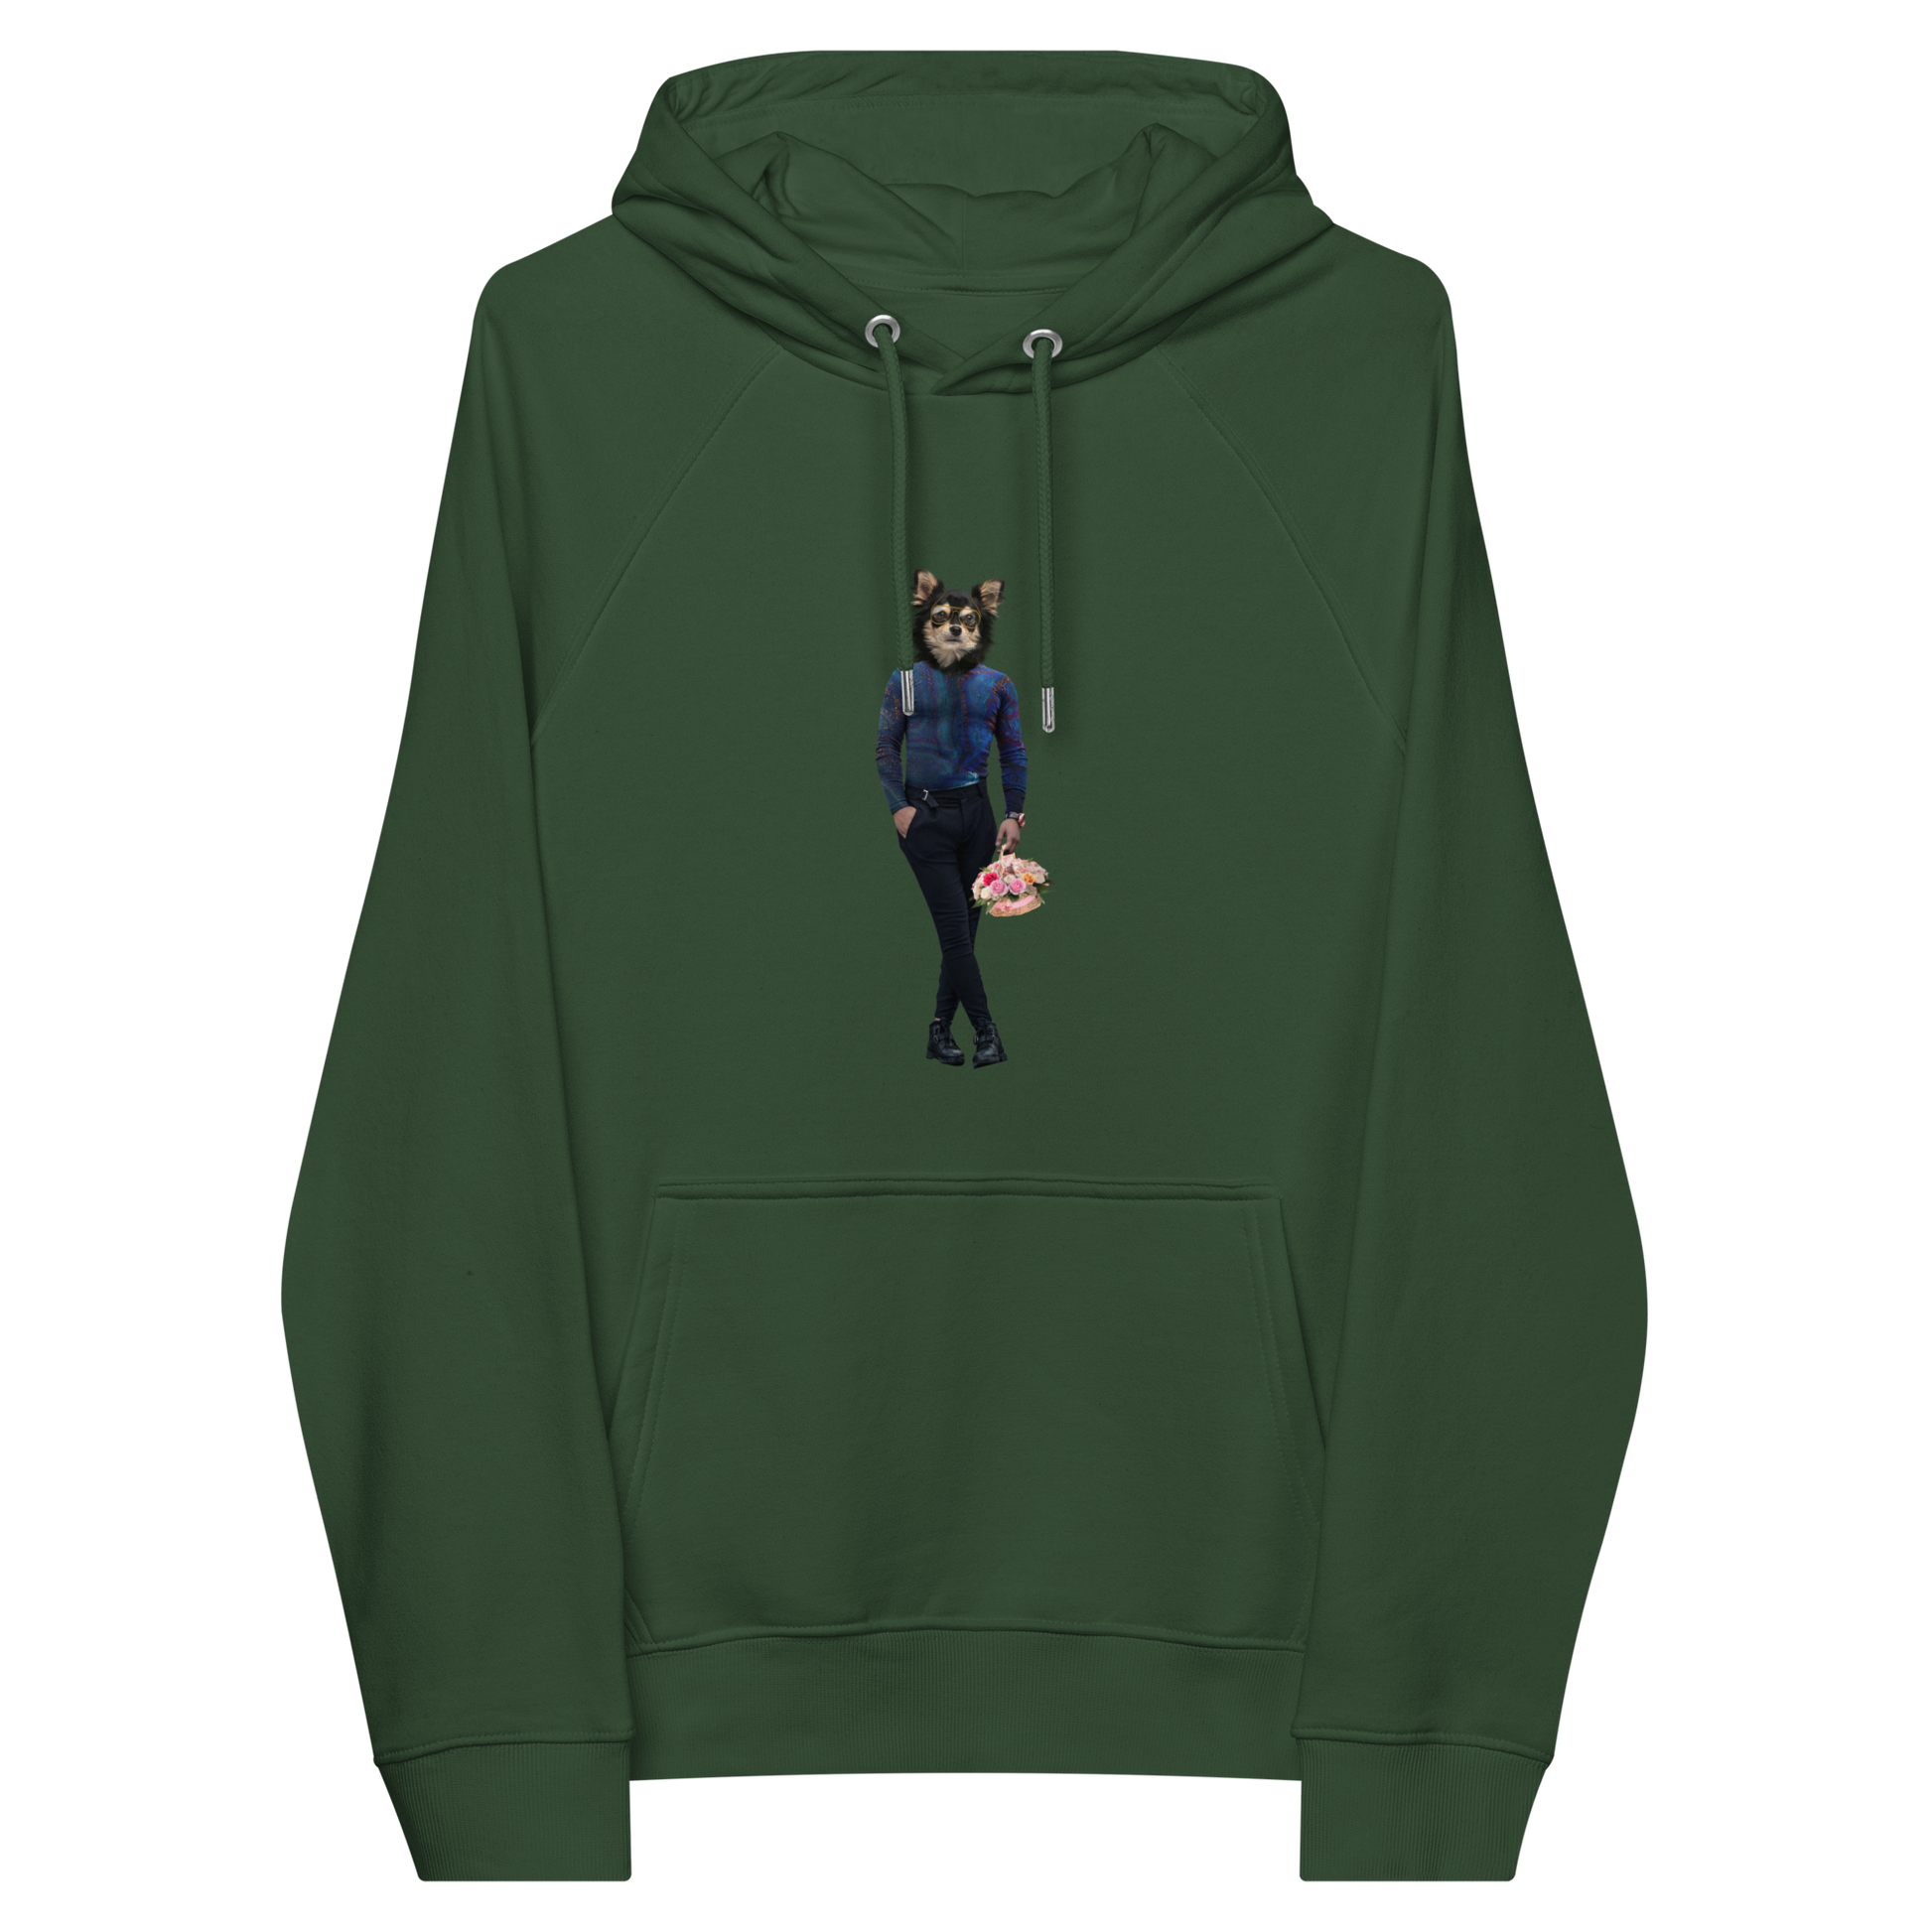 Bottle Green Anthropomorphic Dog Raglan Hoodie featuring an adorable Anthropomorphic Dog graphic on the chest - Funny Graphic Dog Hoodies - Boozy Fox